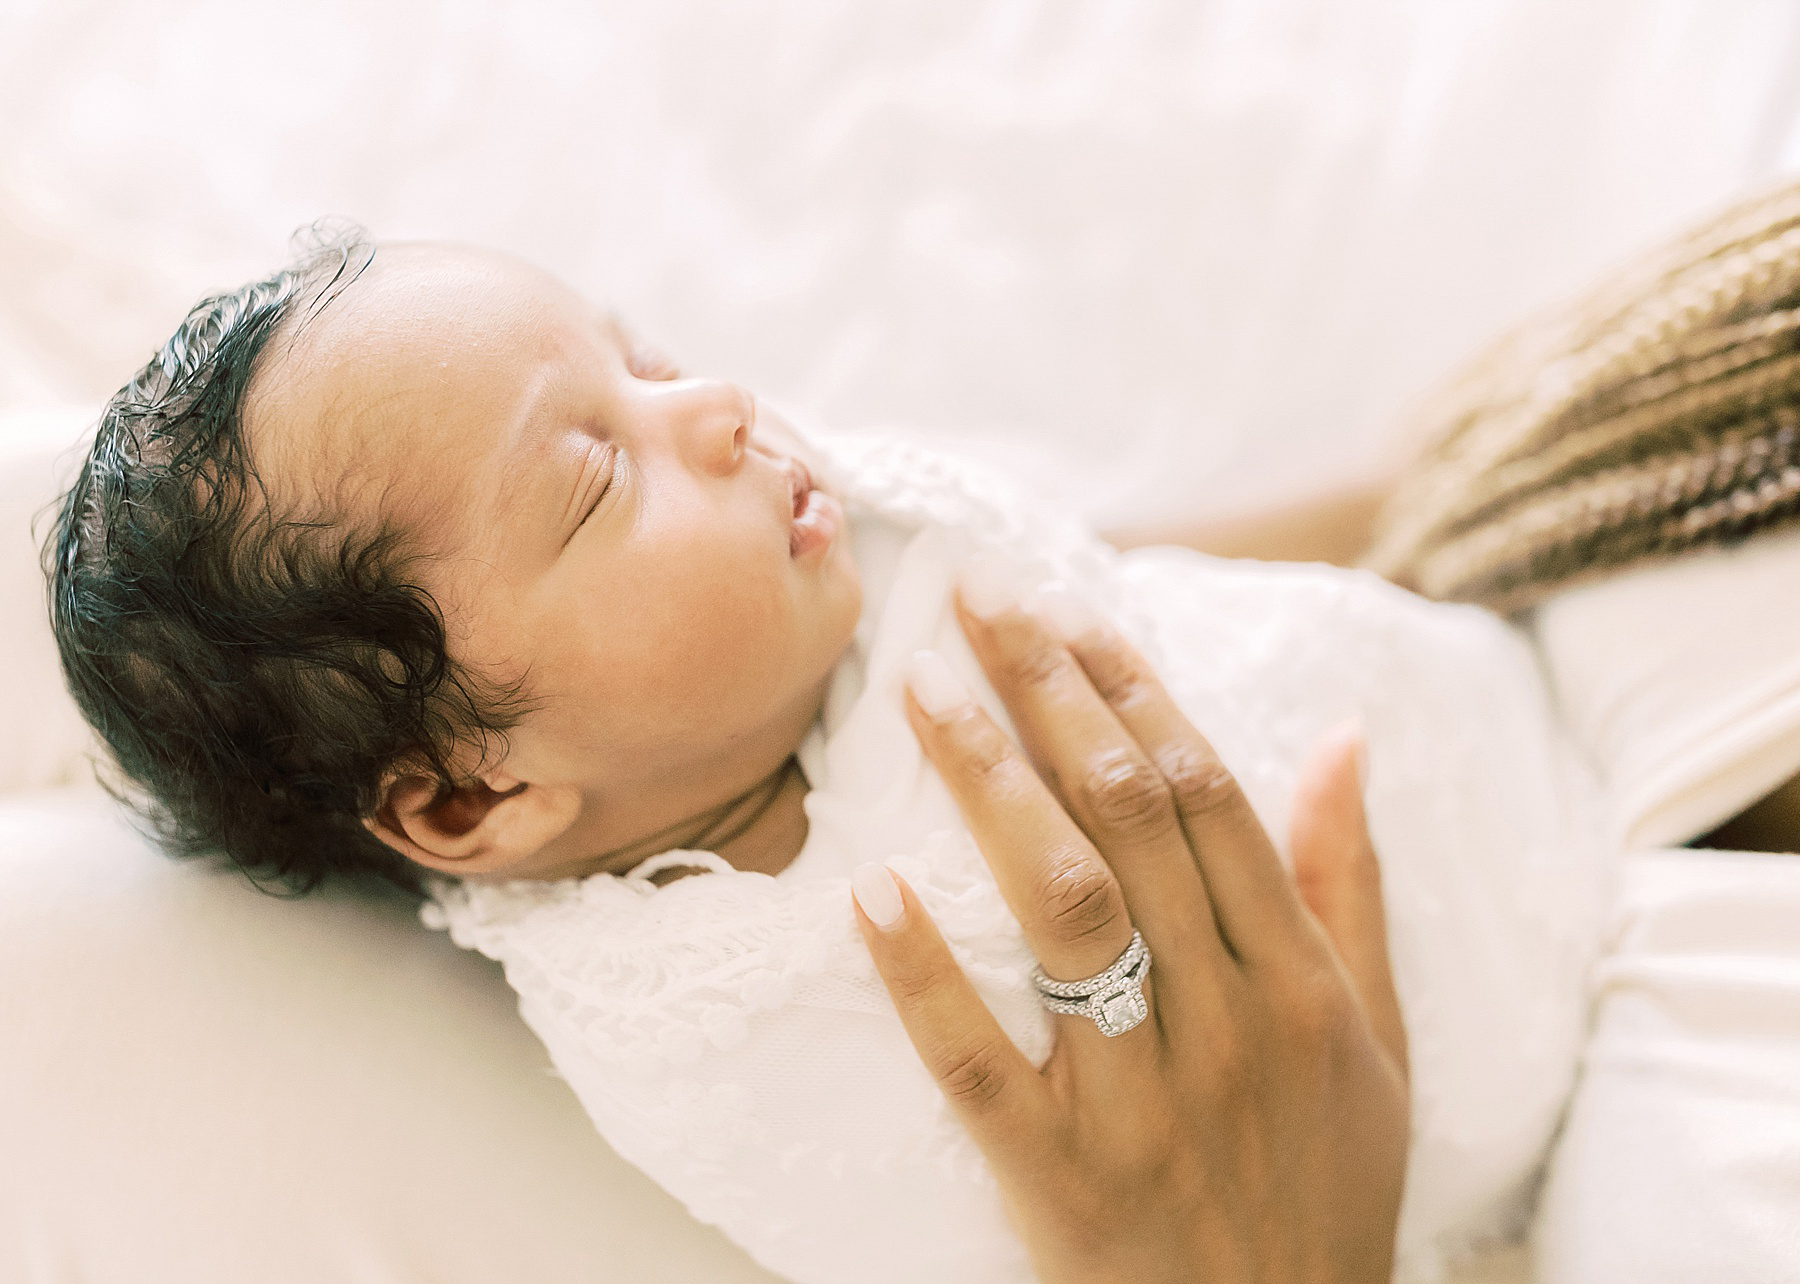 newborn baby girl on bed against light and airy white sheers window light